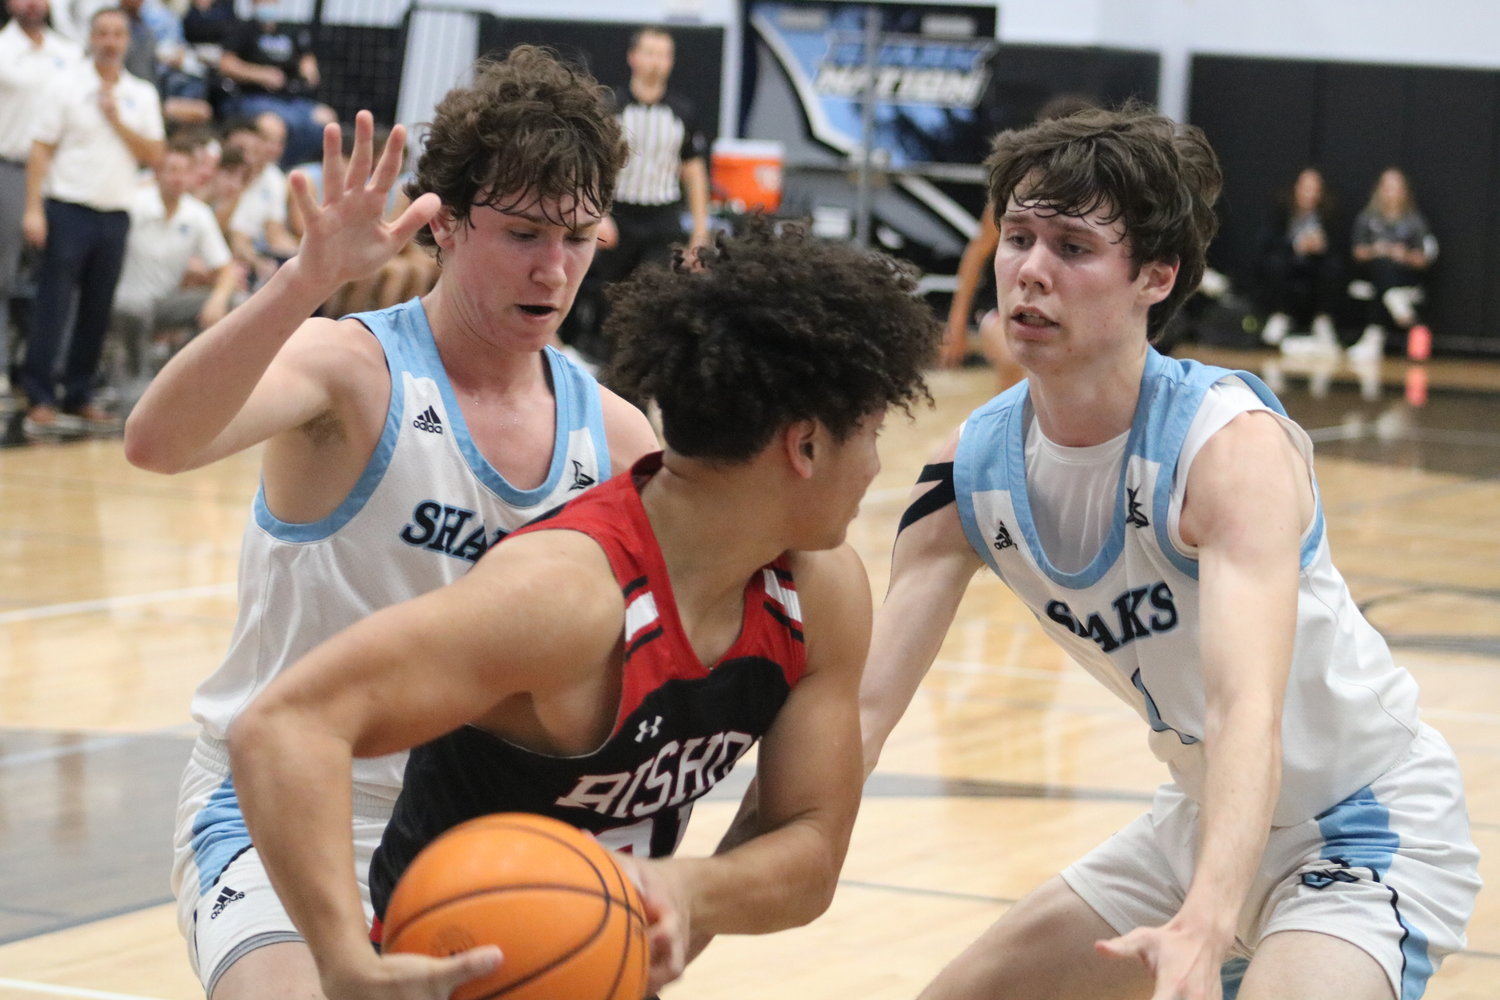 Ponte Vedra’s J.T. Kelly and Gus Jordheim trap a Bishop Kenny ball handler in the back court. Pressure defense was key to the Sharks’ success.